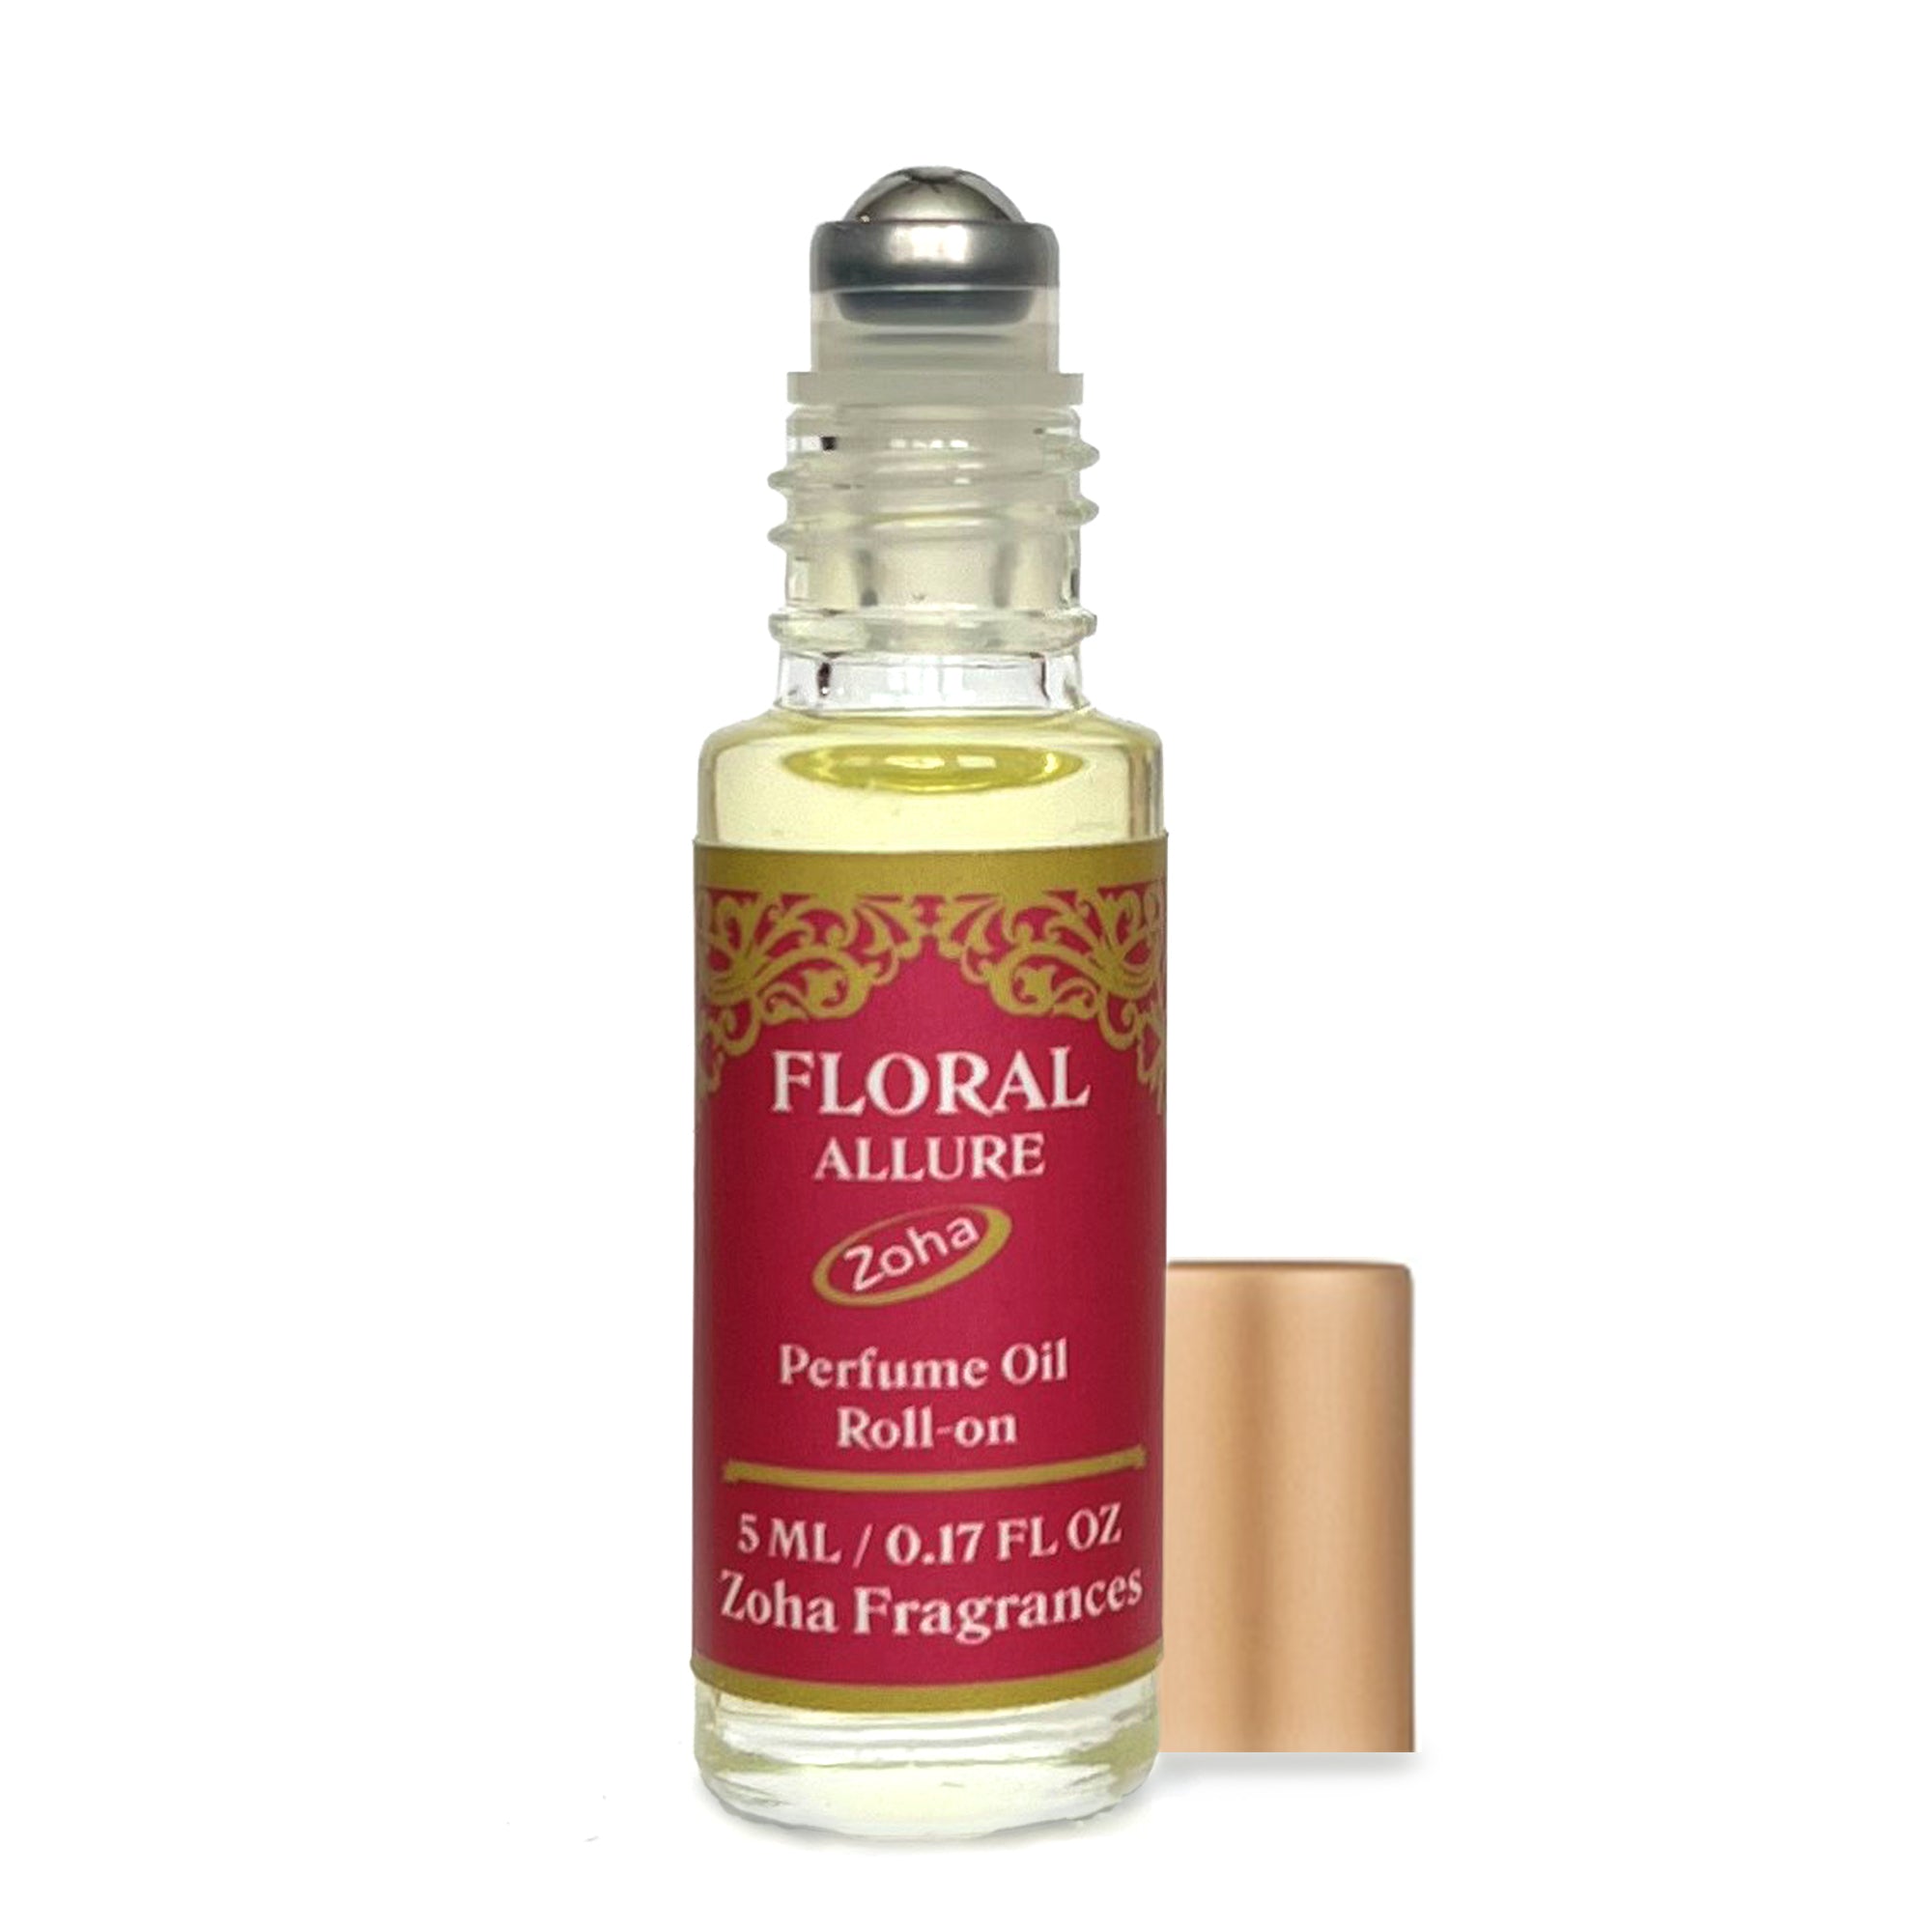 Floral Allure Roll On Perfume for Women and Men